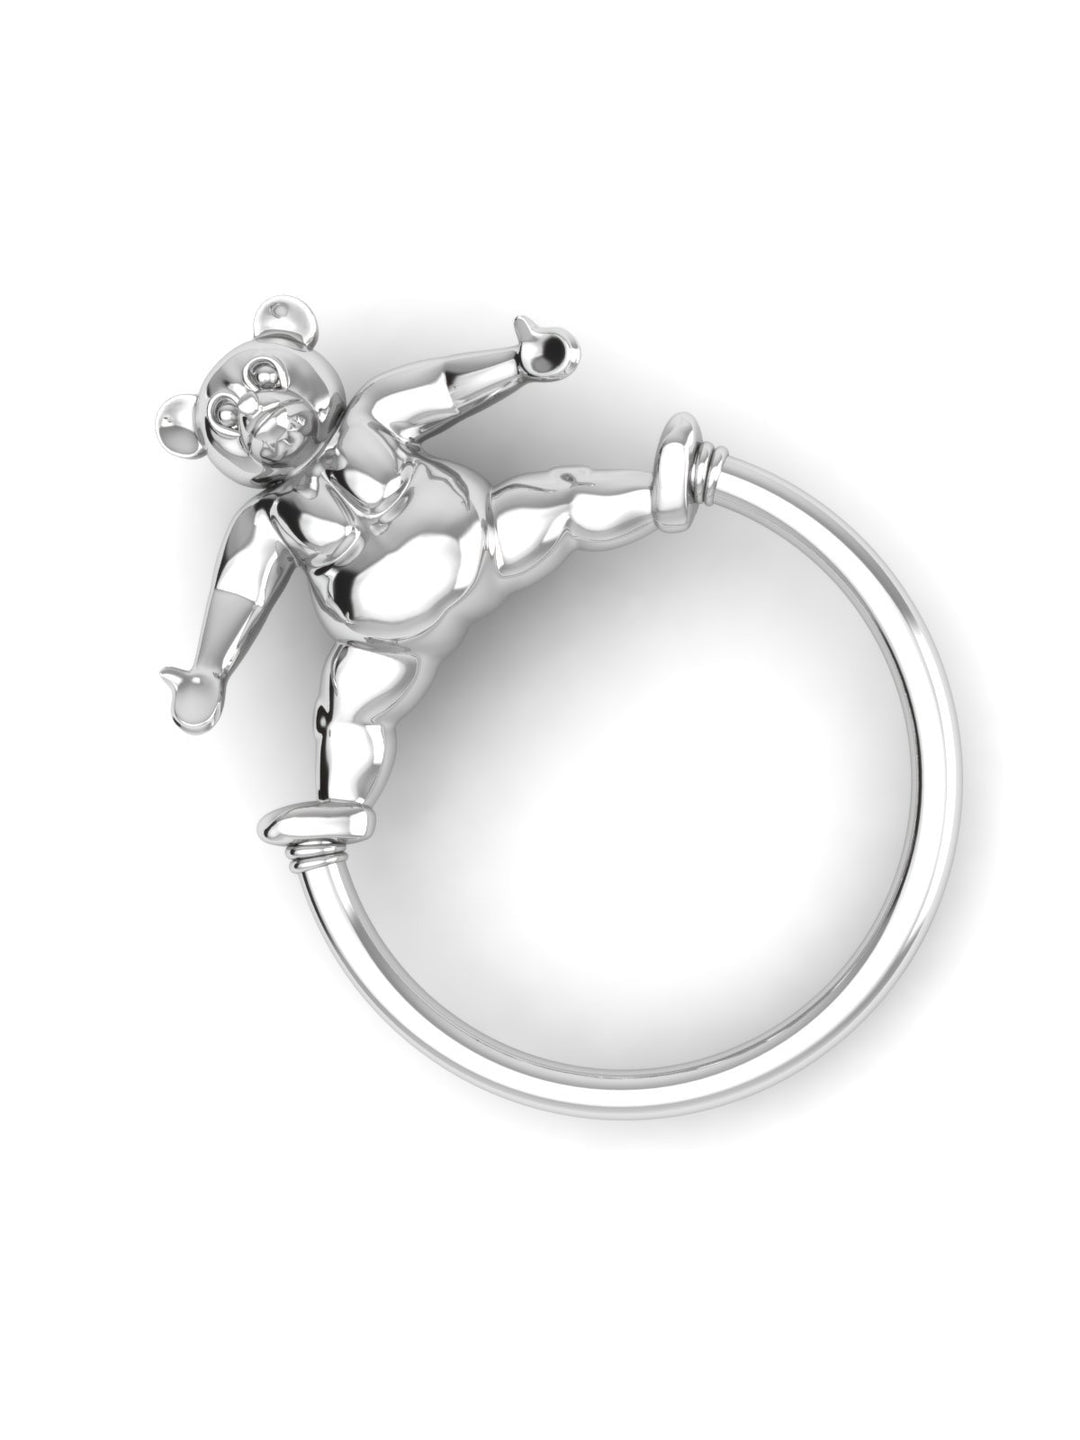 Silver Baby Teddy Ring Rattle